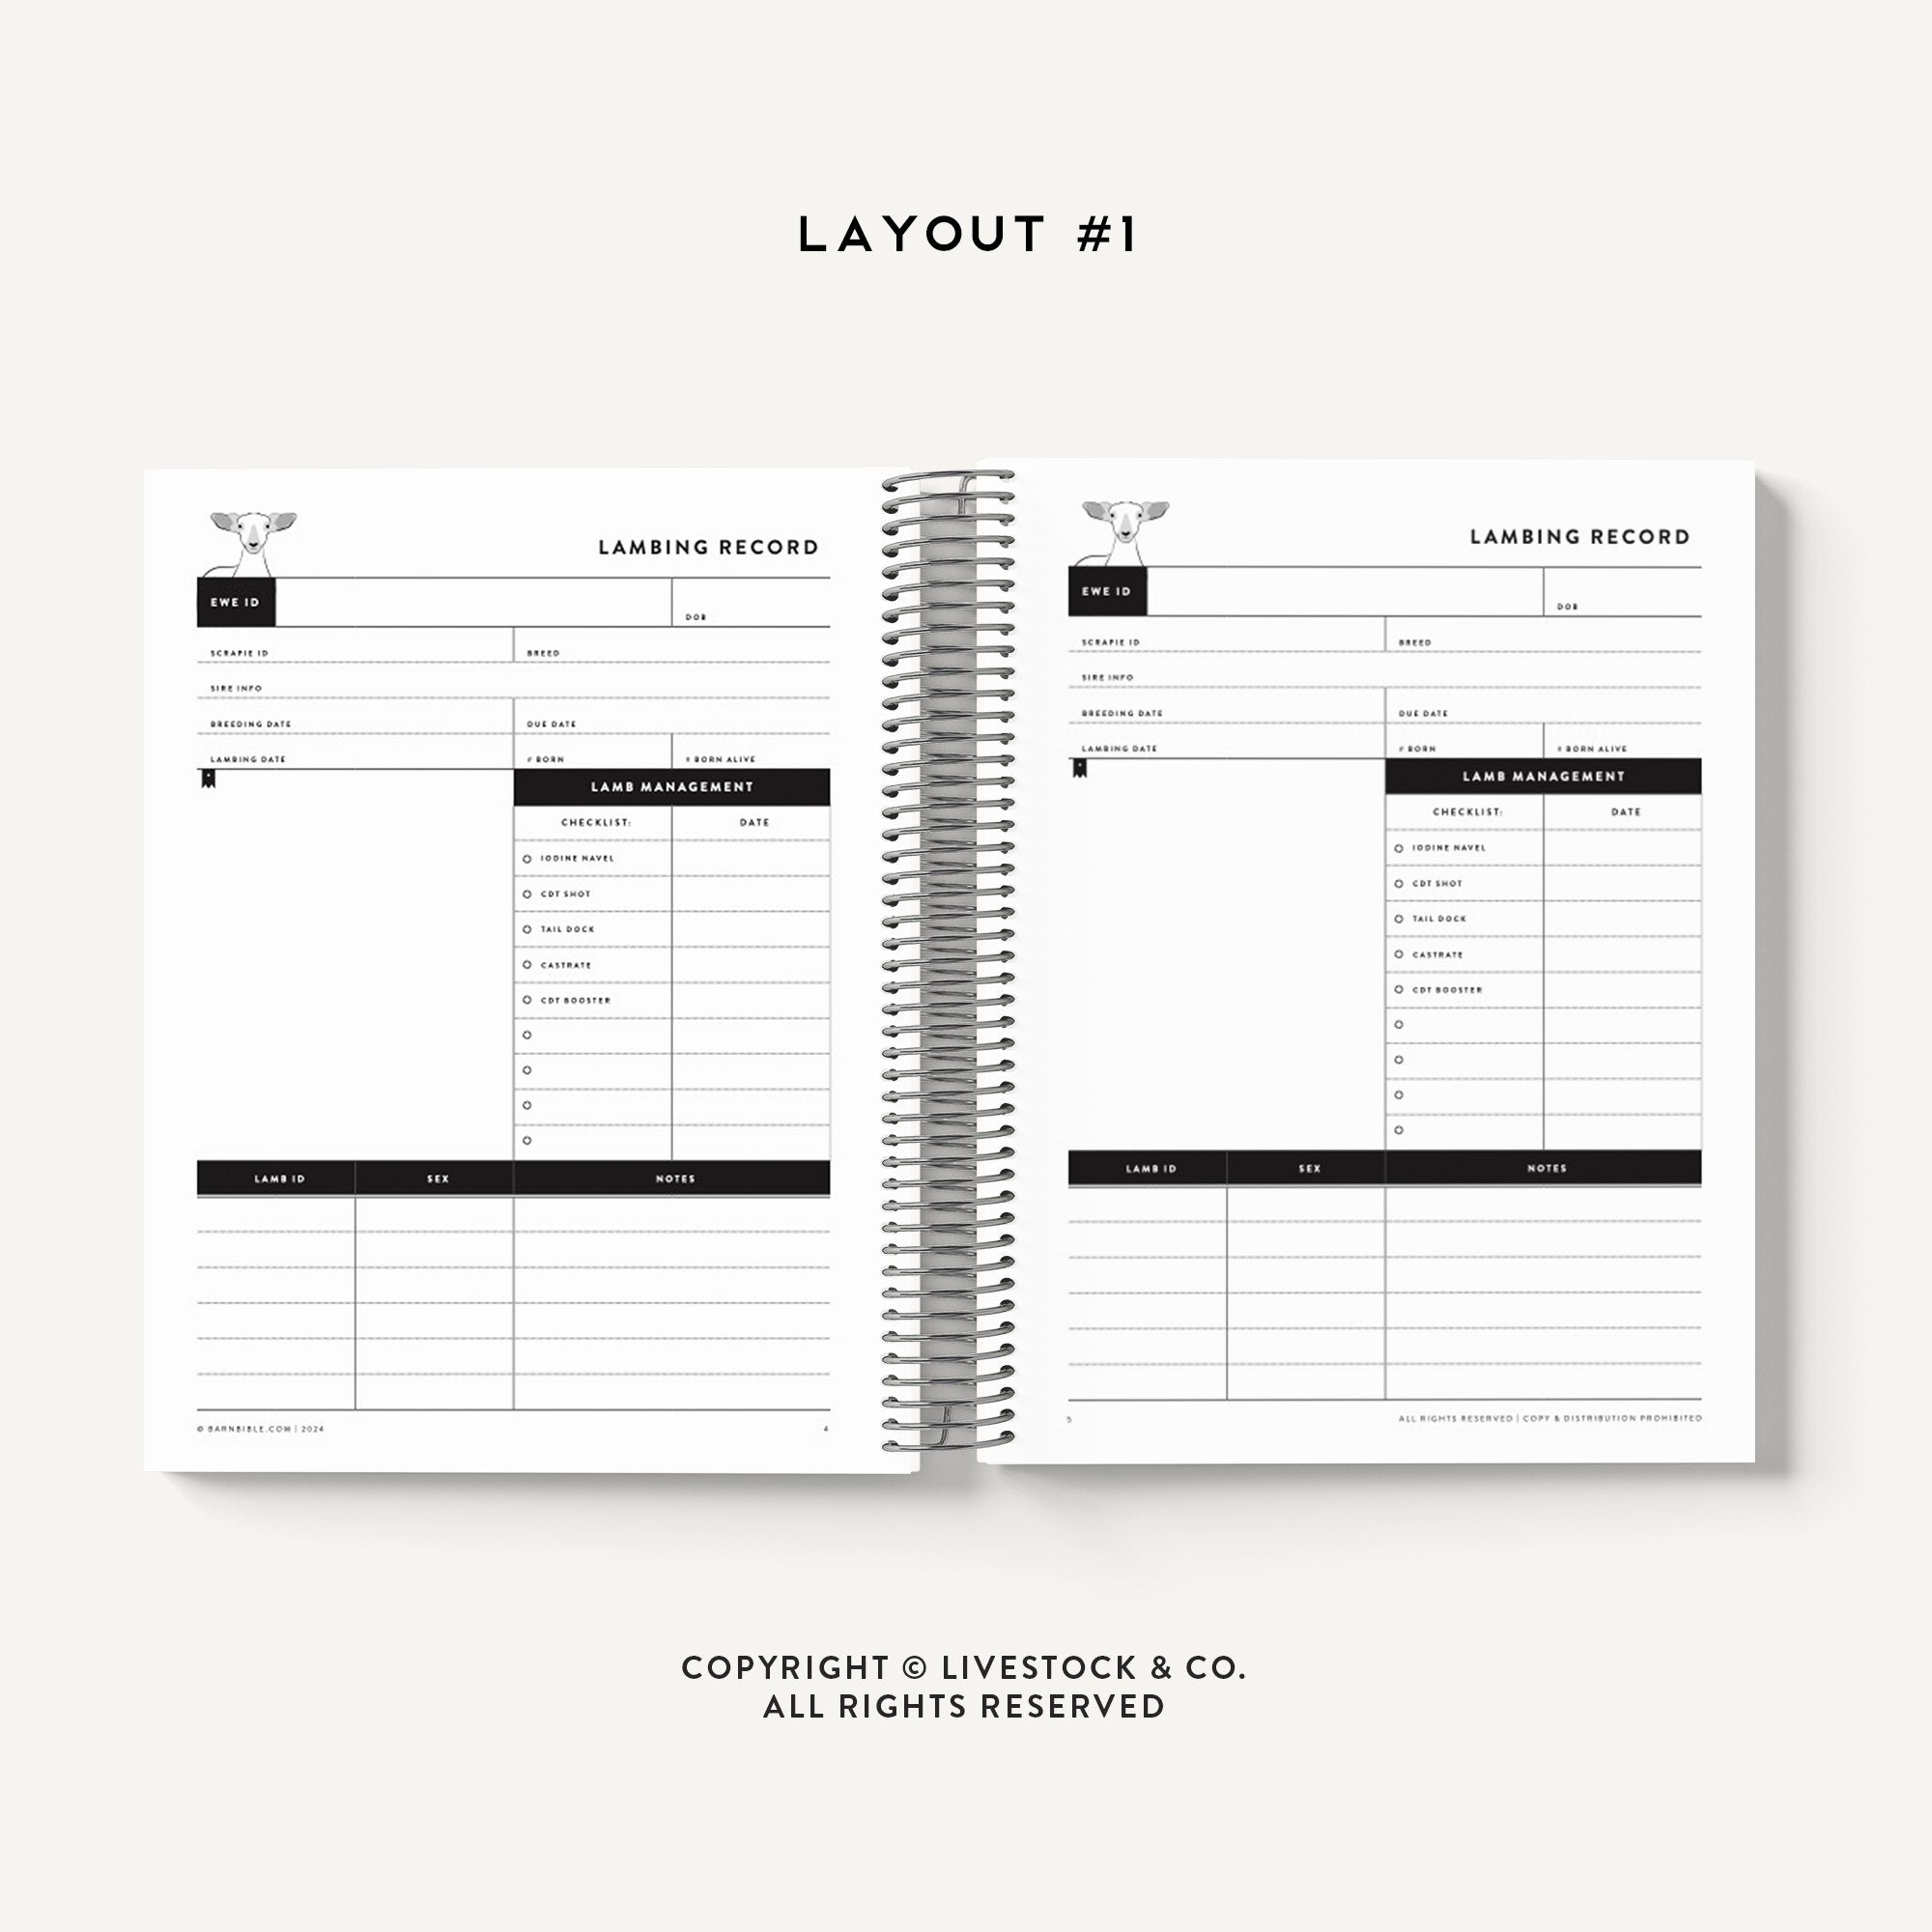 Personalized-Livestock-Lambing Record Planner - Cheetah Cover